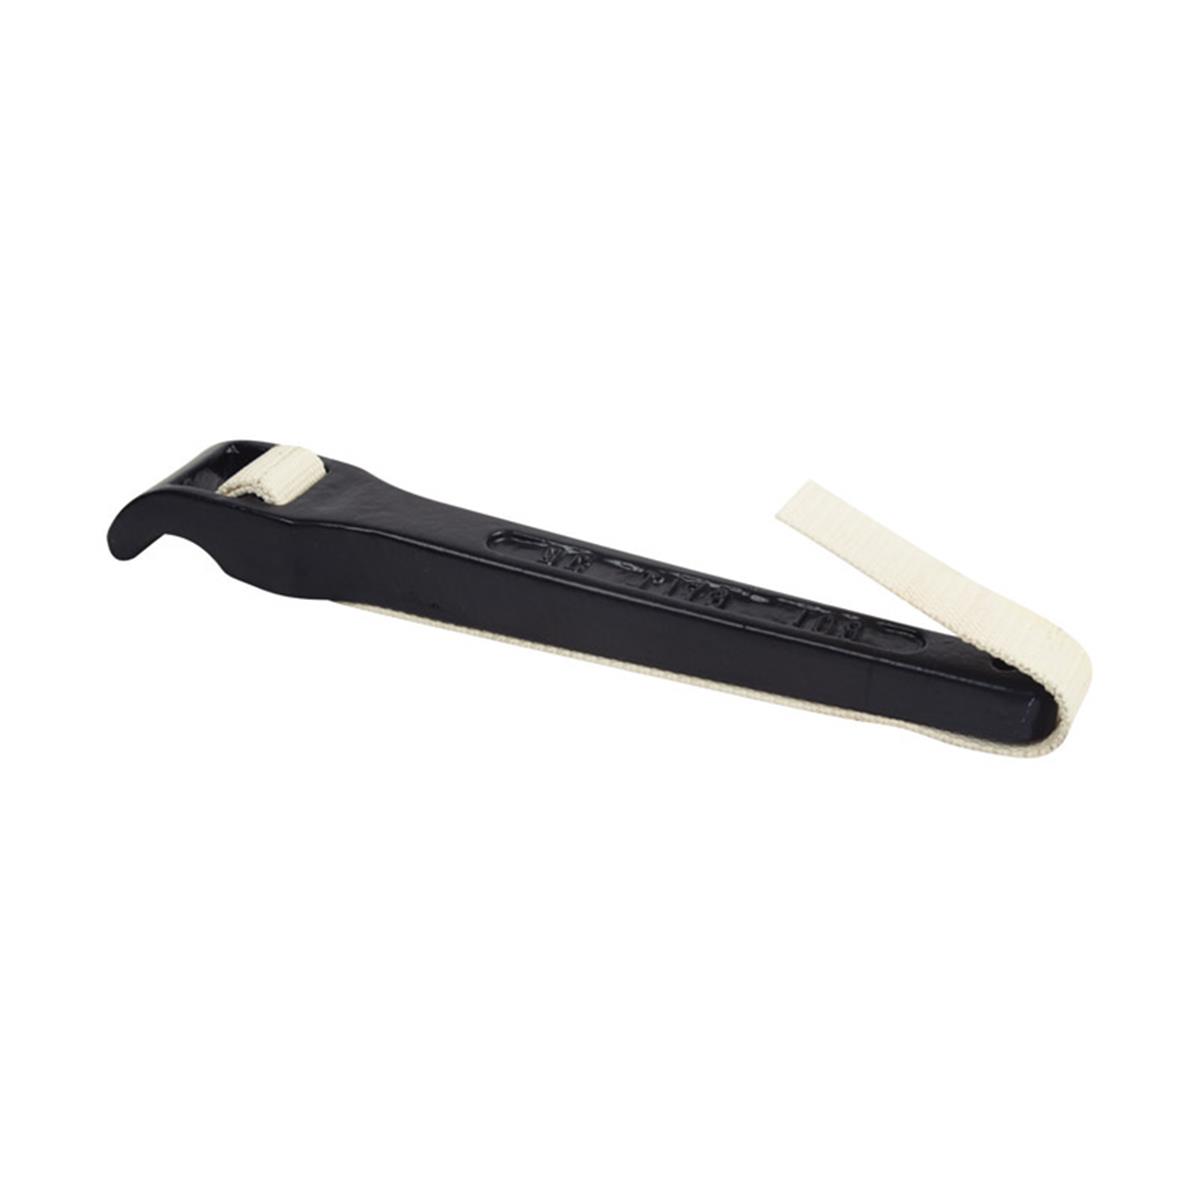 4828141 Up To 3.5 In. Adjustable Strap Wrench - Black